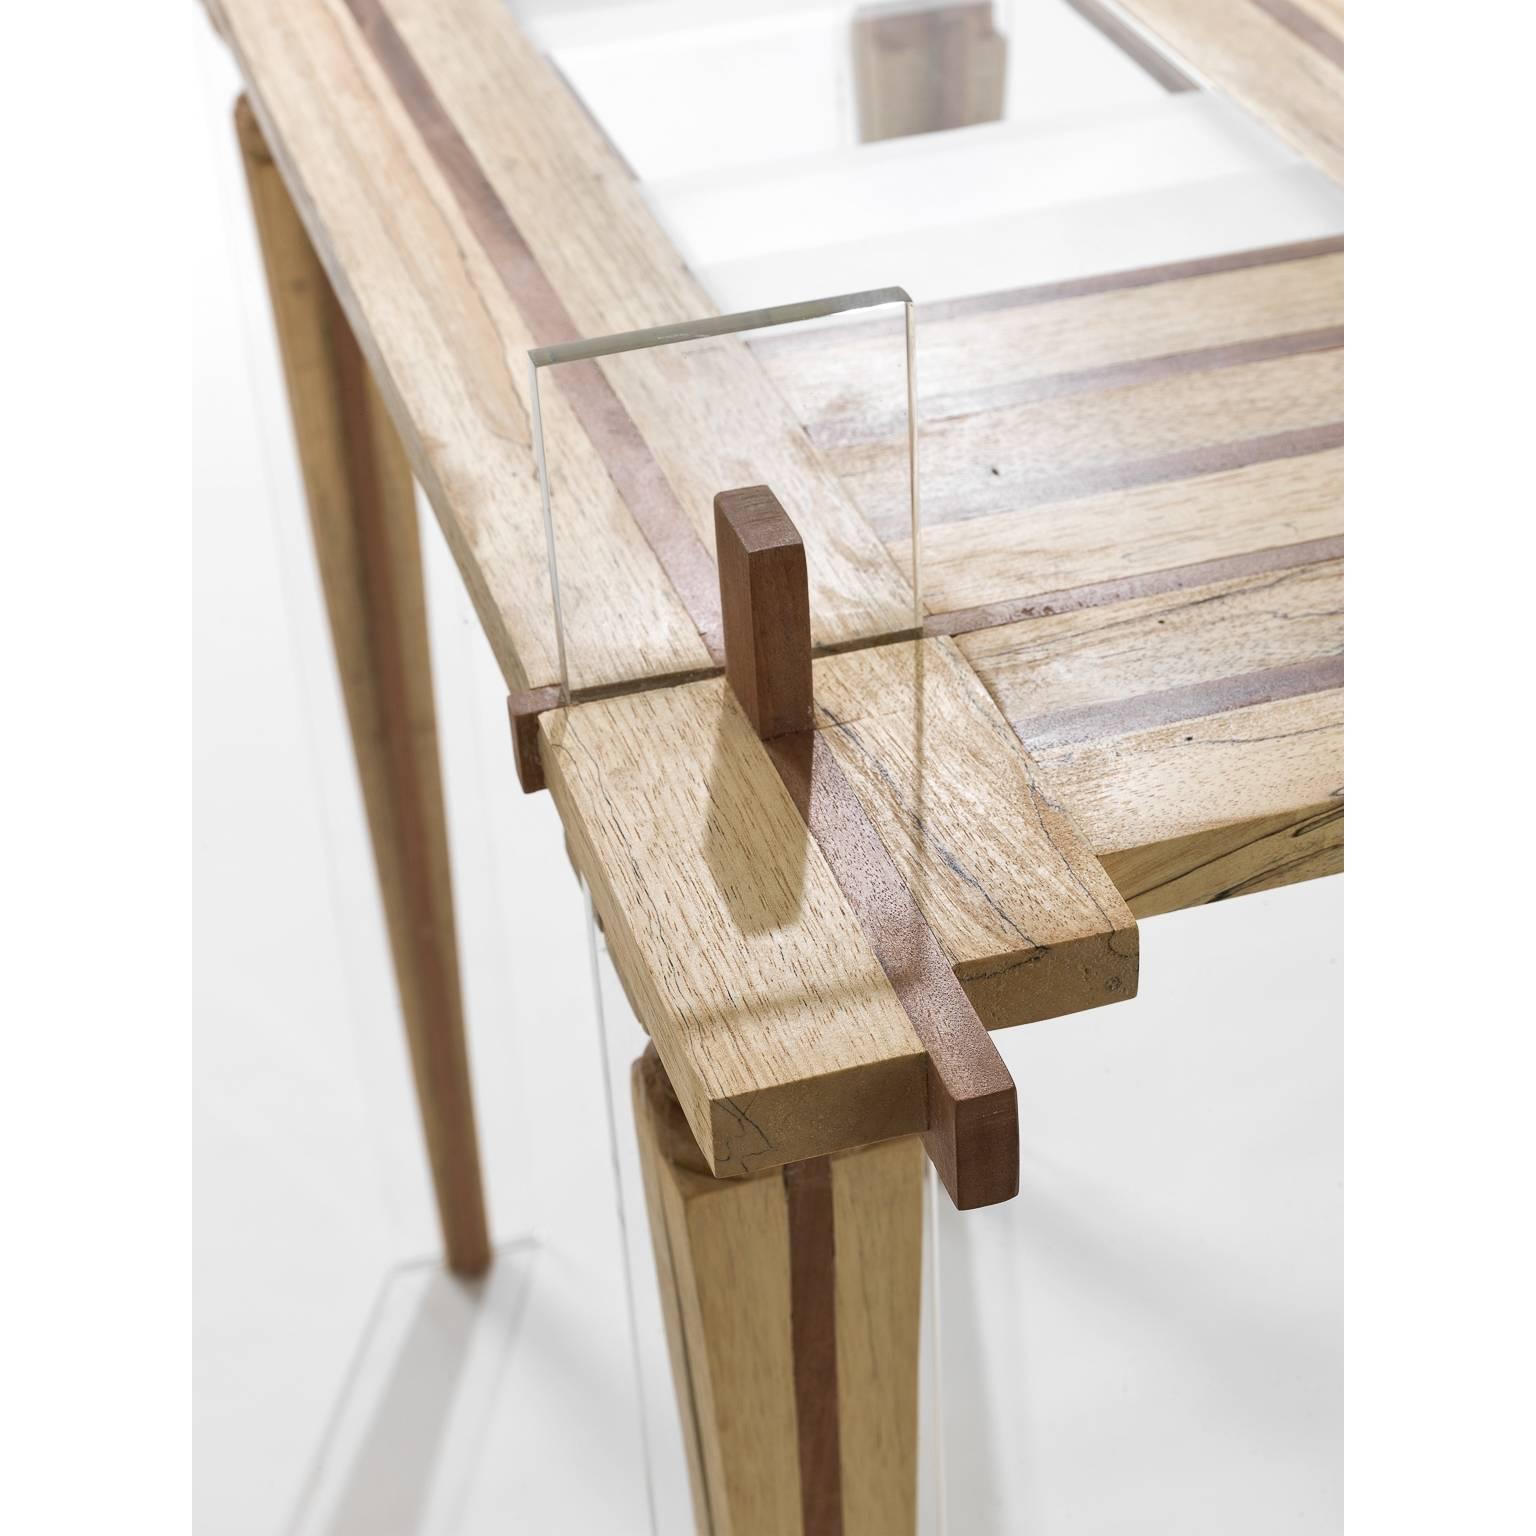 Hand-Crafted Contemporary Small Just Contrast Console by Hillsideout, 2016 For Sale